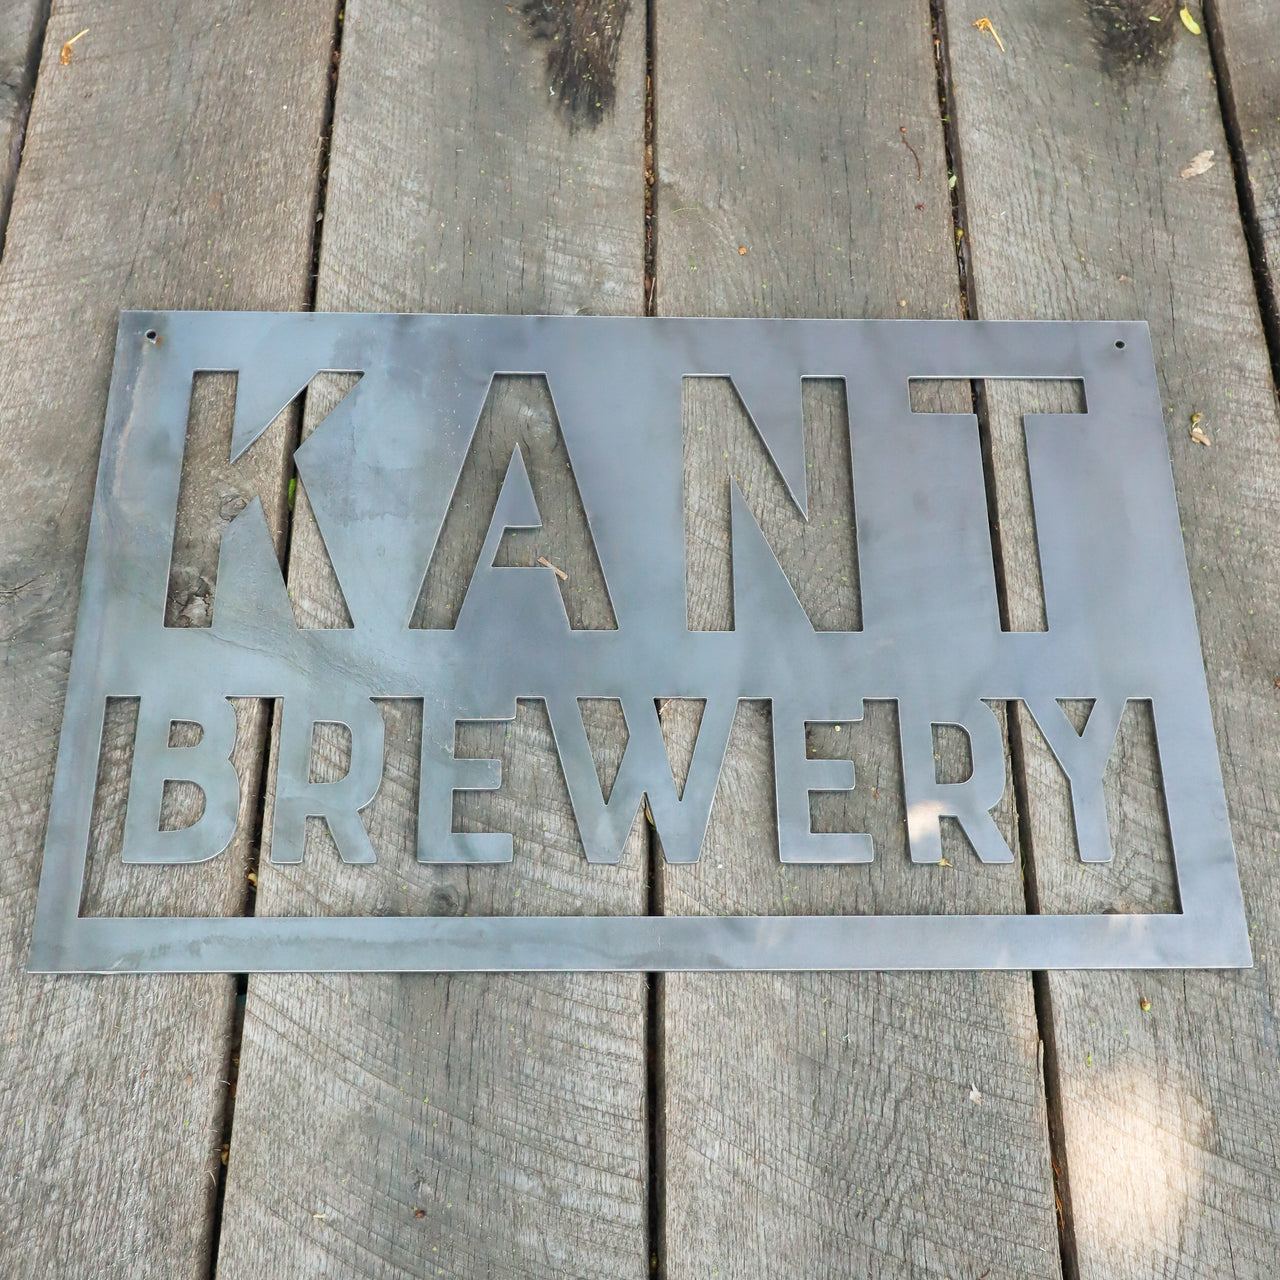 Personalized Metal Brewery Sign - Man Cave Bar Wall Art - Compound, Clubhouse, Outdoor Patio Decor